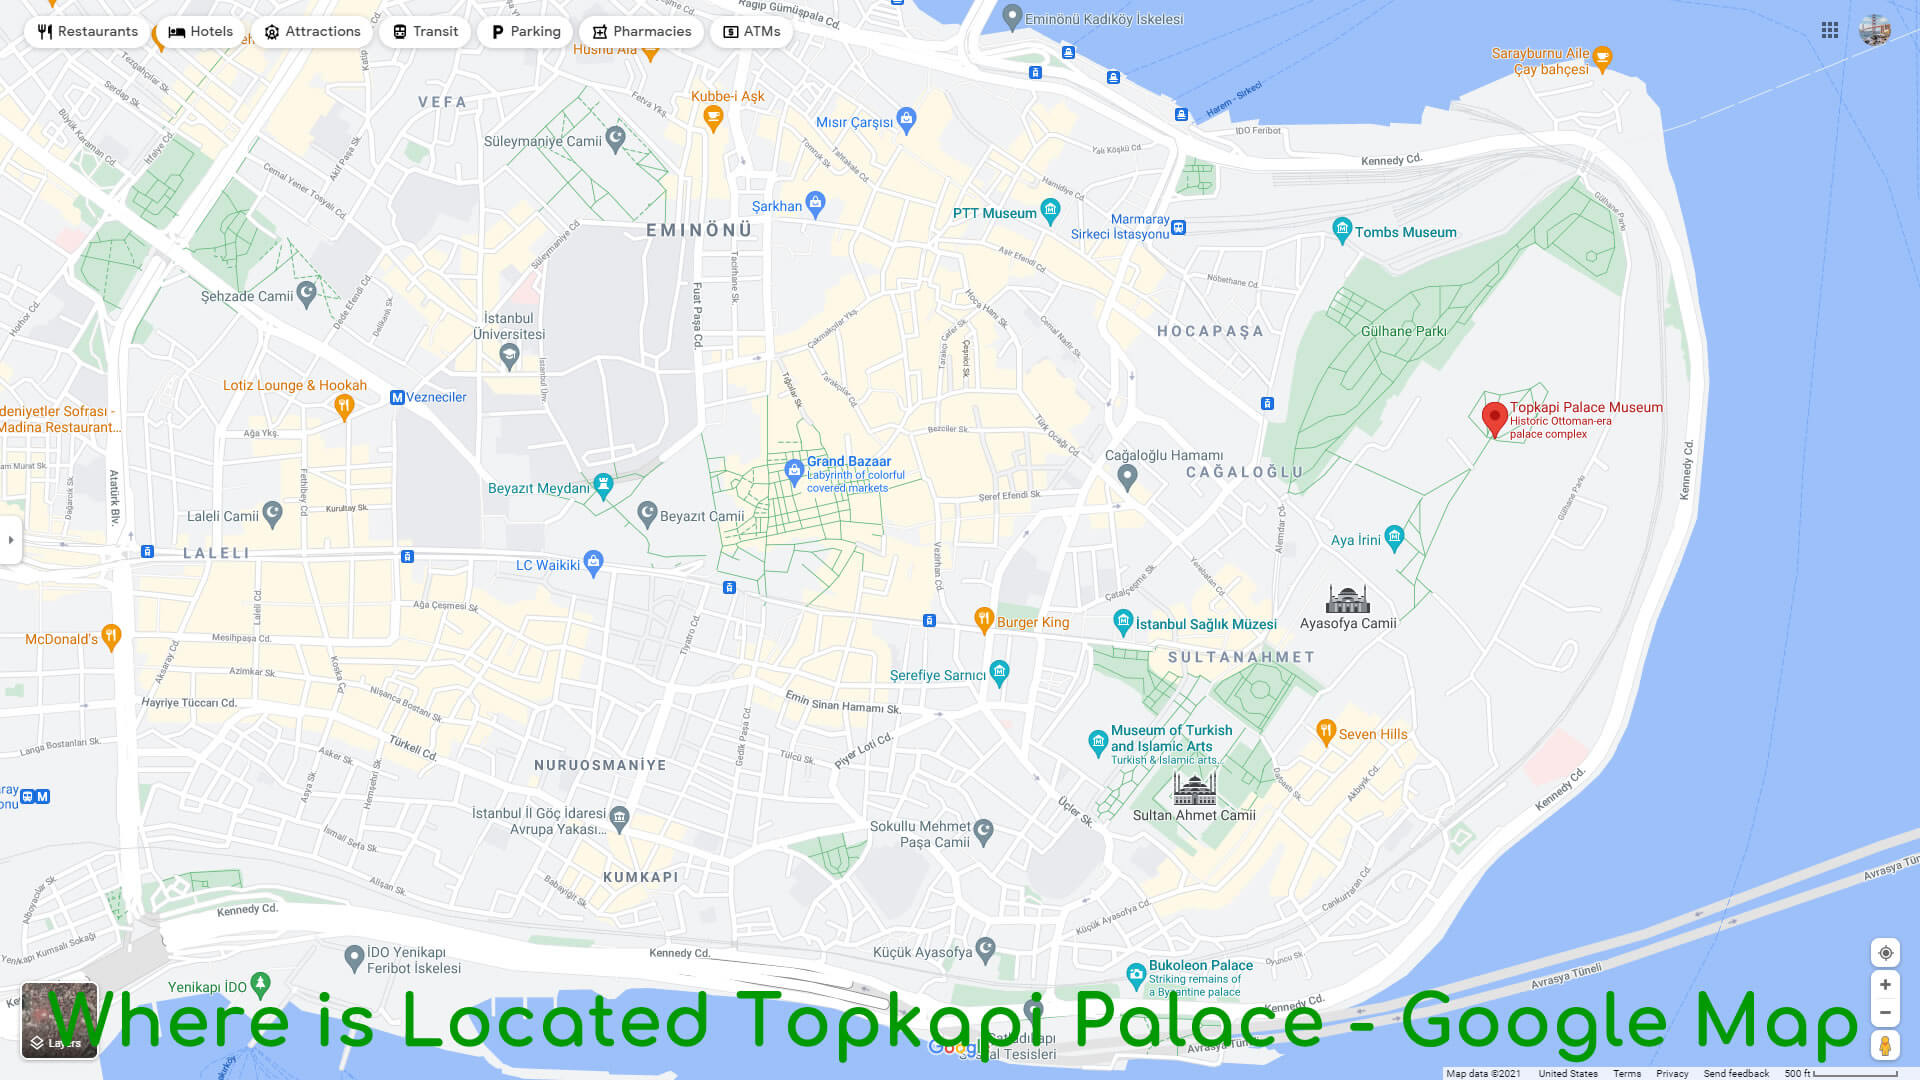 Where is Located Topkapi Palace - Google Map